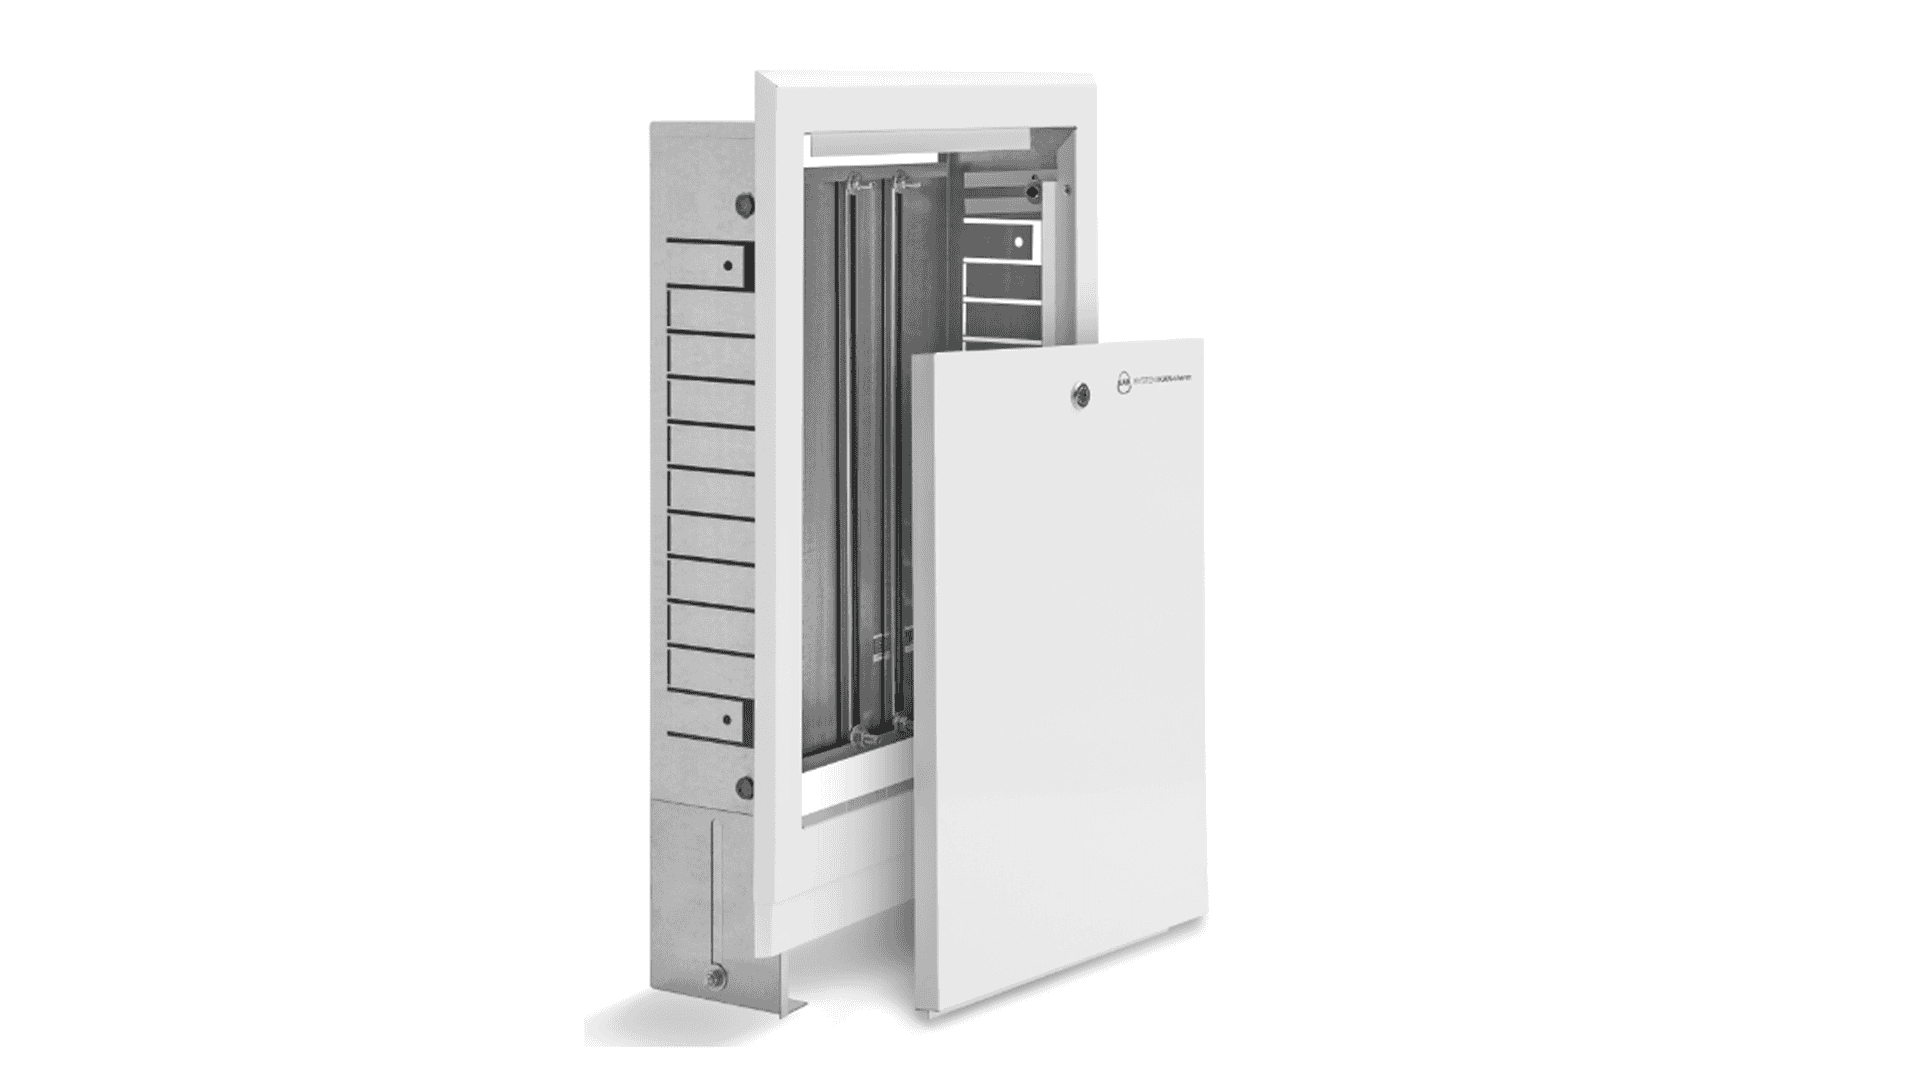 KAN-therm - Installation cabinets Slim and Slim+ - Wall-mounted cabinet SWPS and SWPSE for radiator and drinking water installations